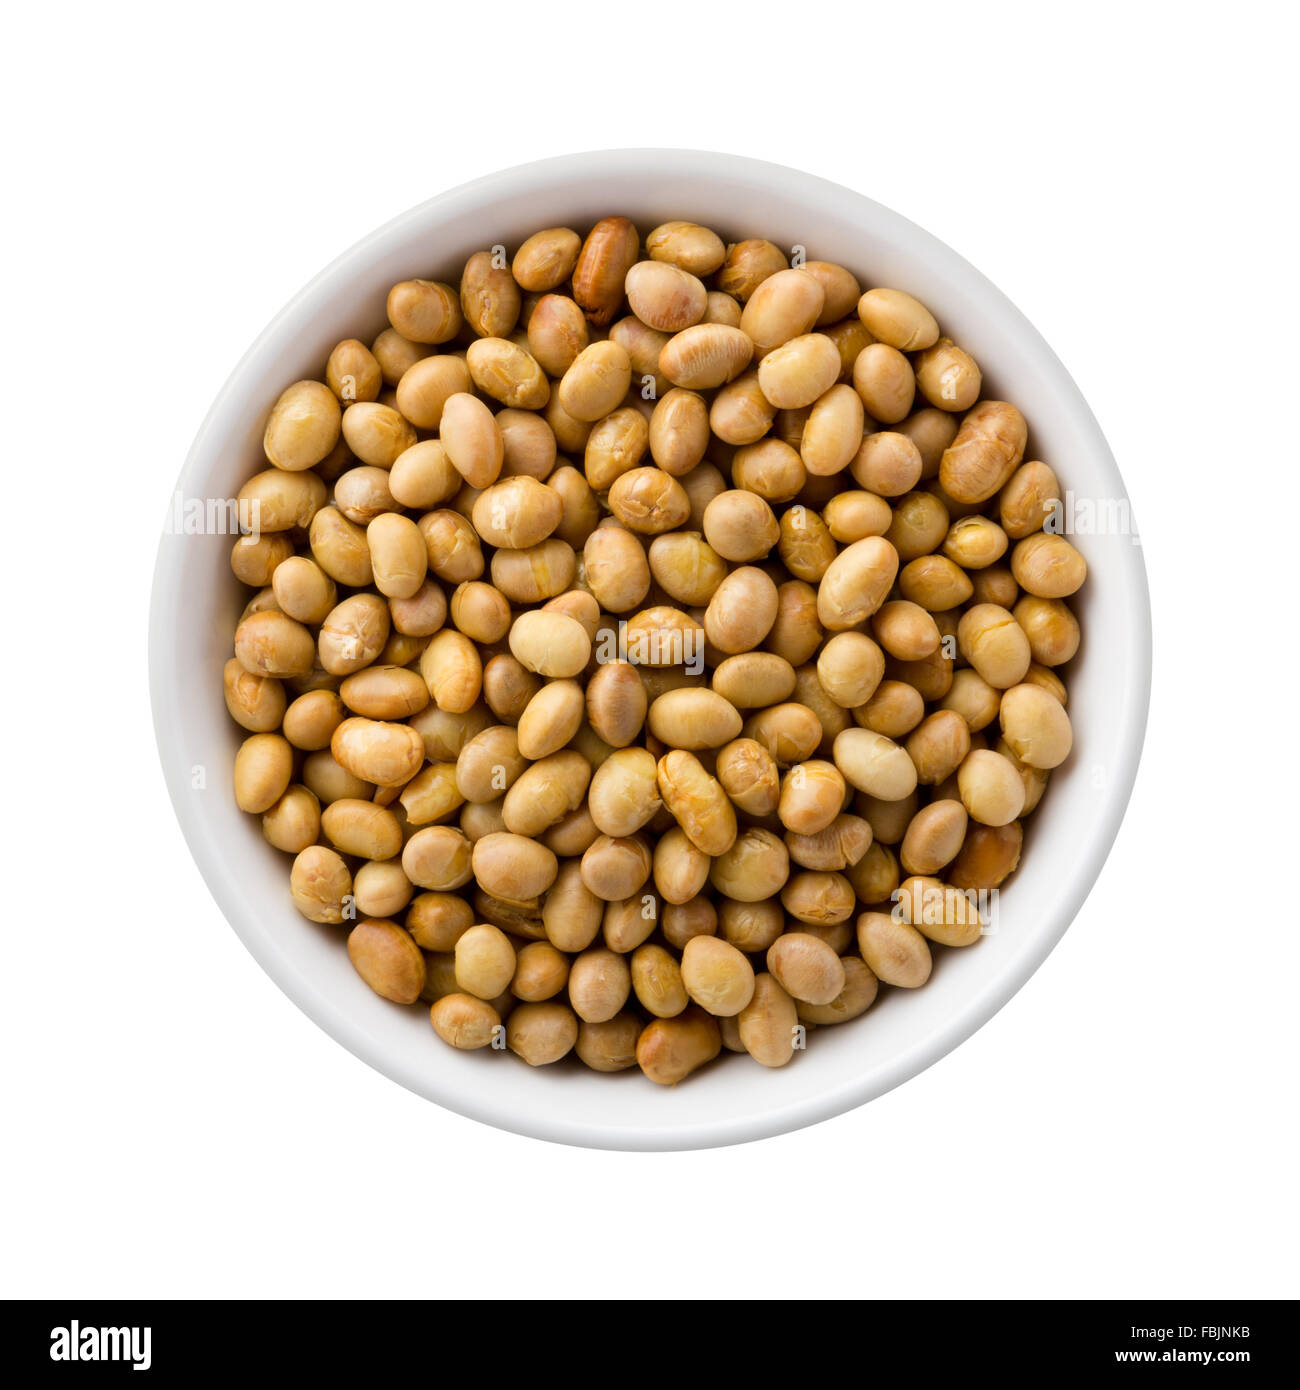 Roasted Soy Nuts in a Ceramic Bowl Stock Photo